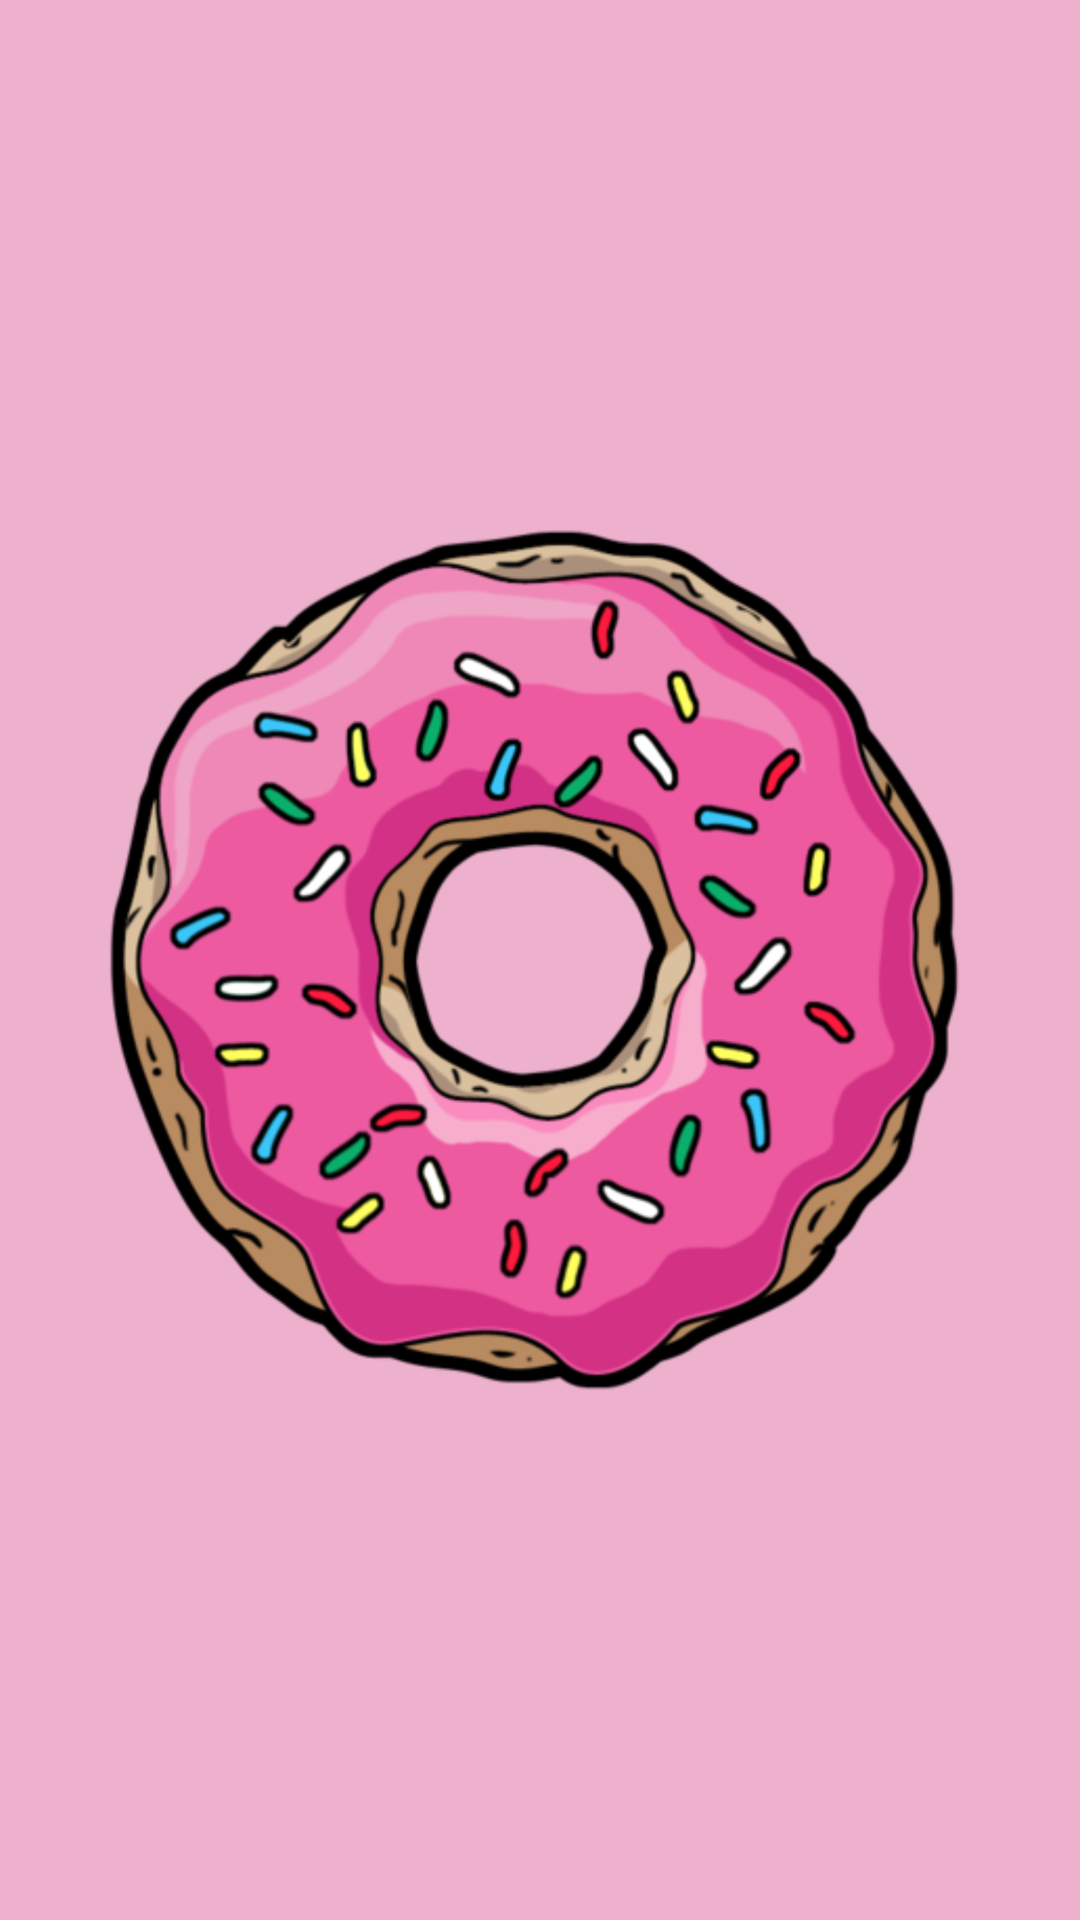 Donut Images  Free Food  Beverage Photography HD Wallpapers PNGs   Illustration Graphics  rawpixel